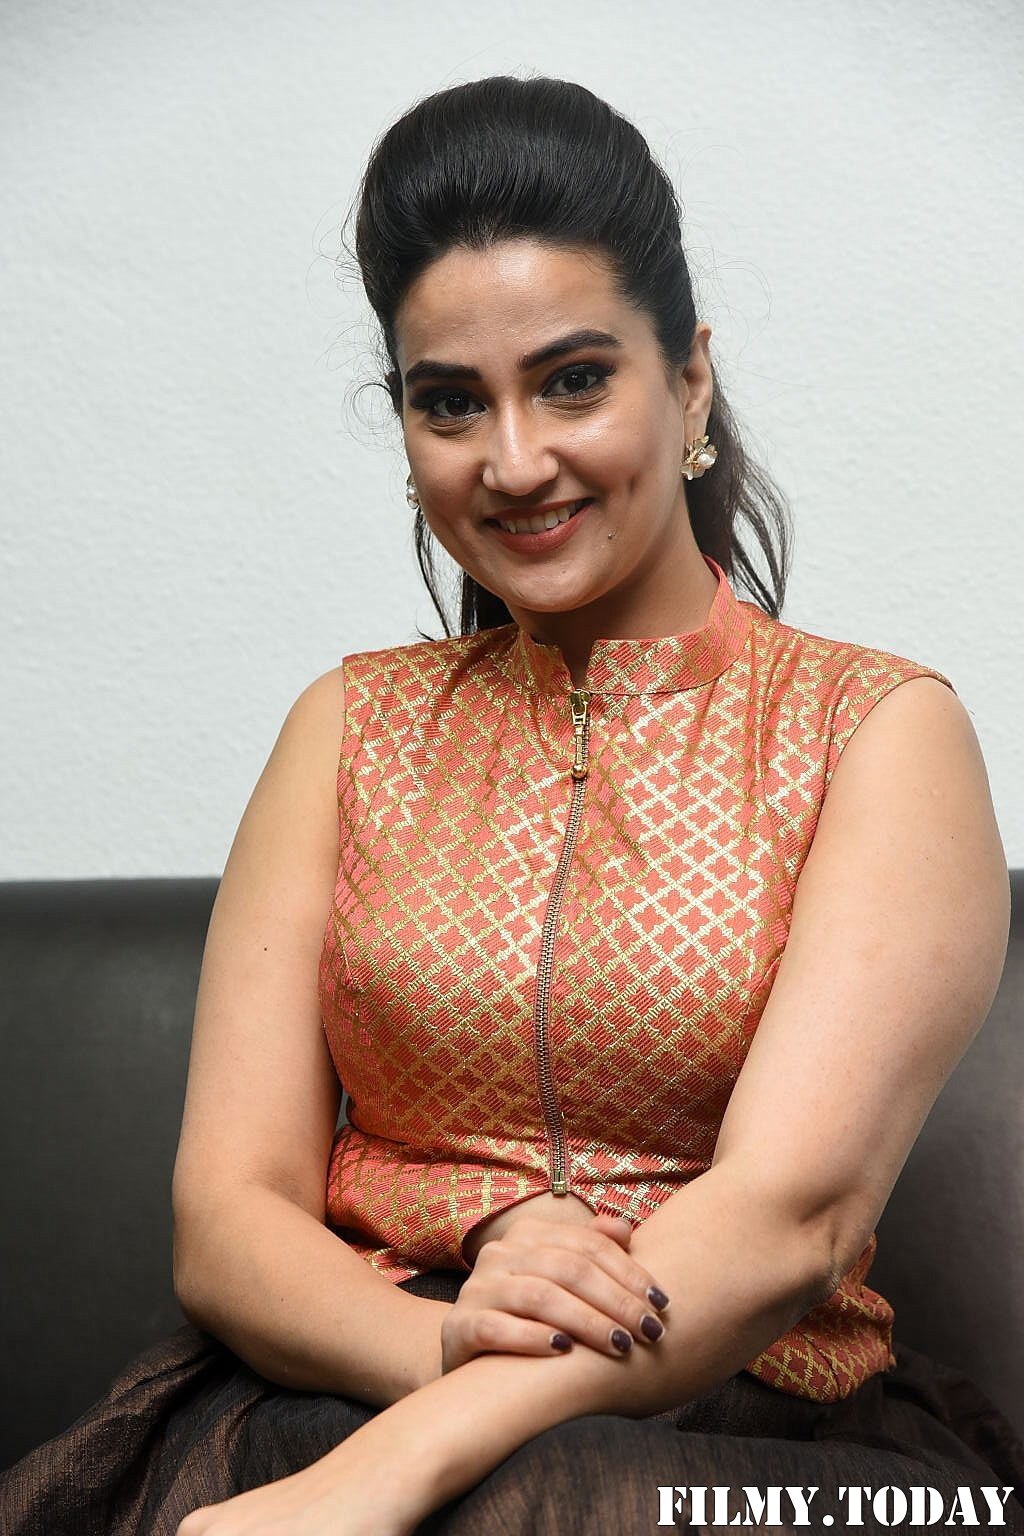 Manjusha - 2 Hours Love Movie Pre Release Event Photos | Picture 1679758